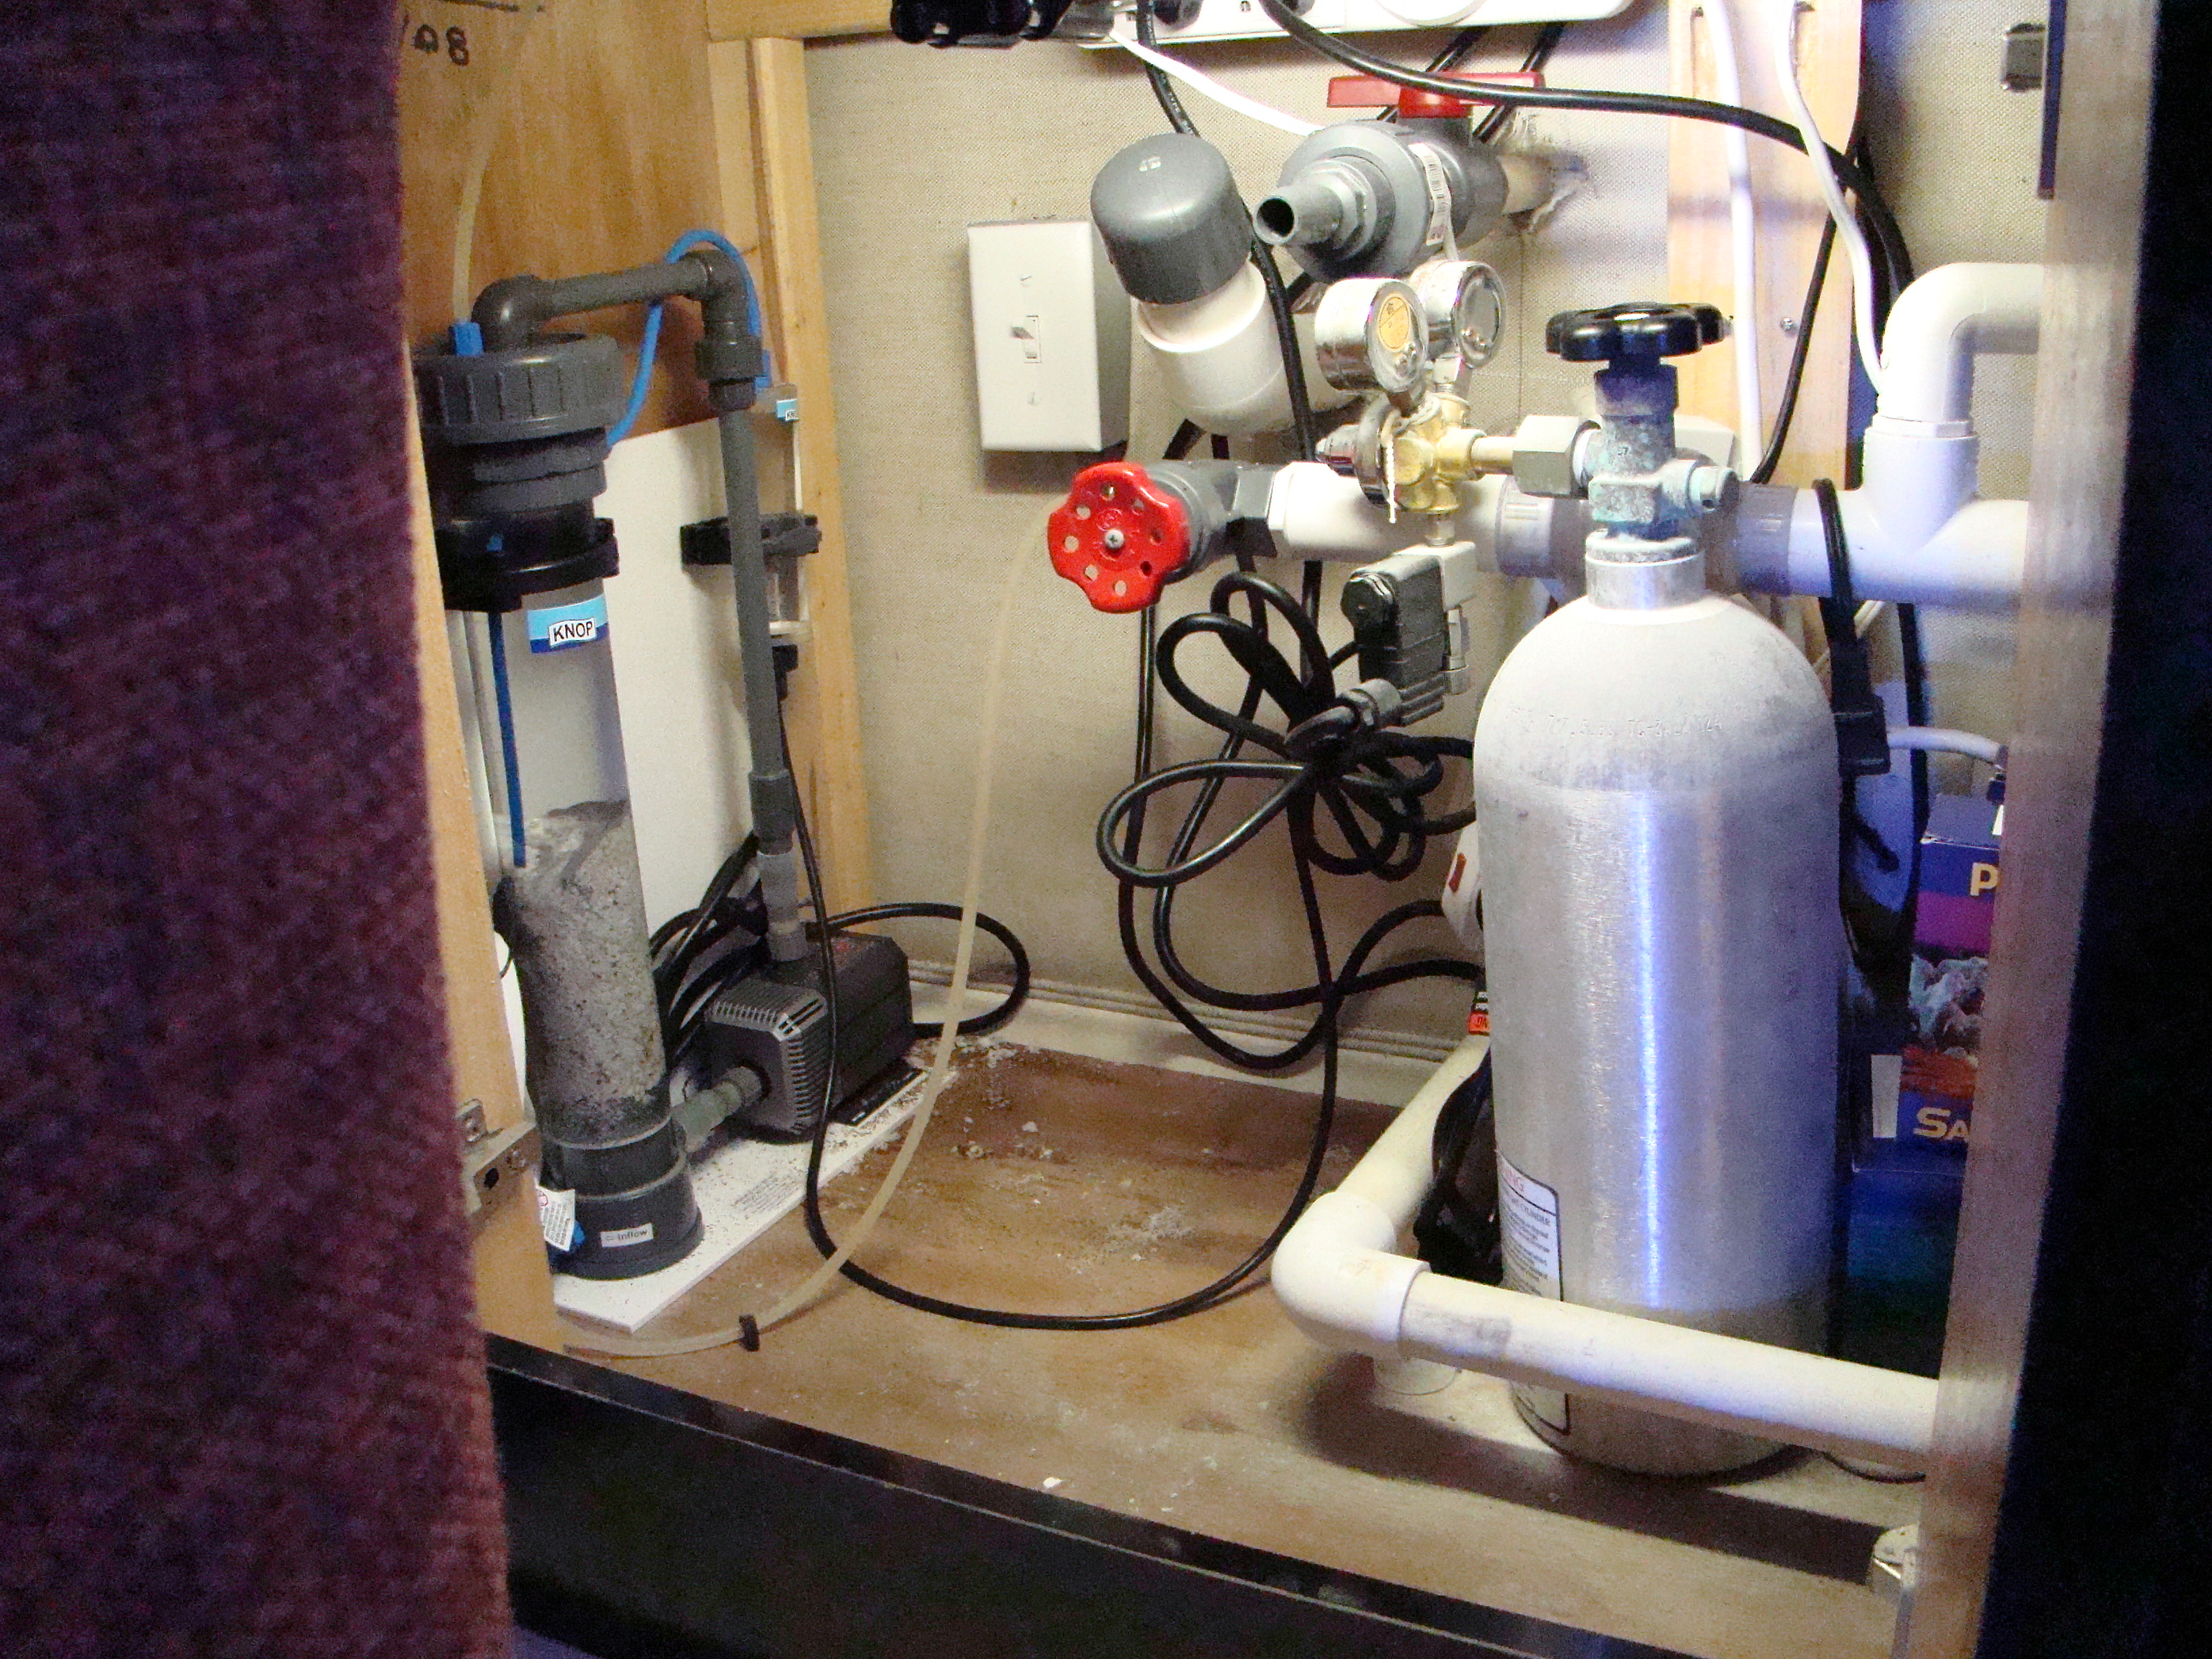 Plastic Pipelines Inside a Cabinet